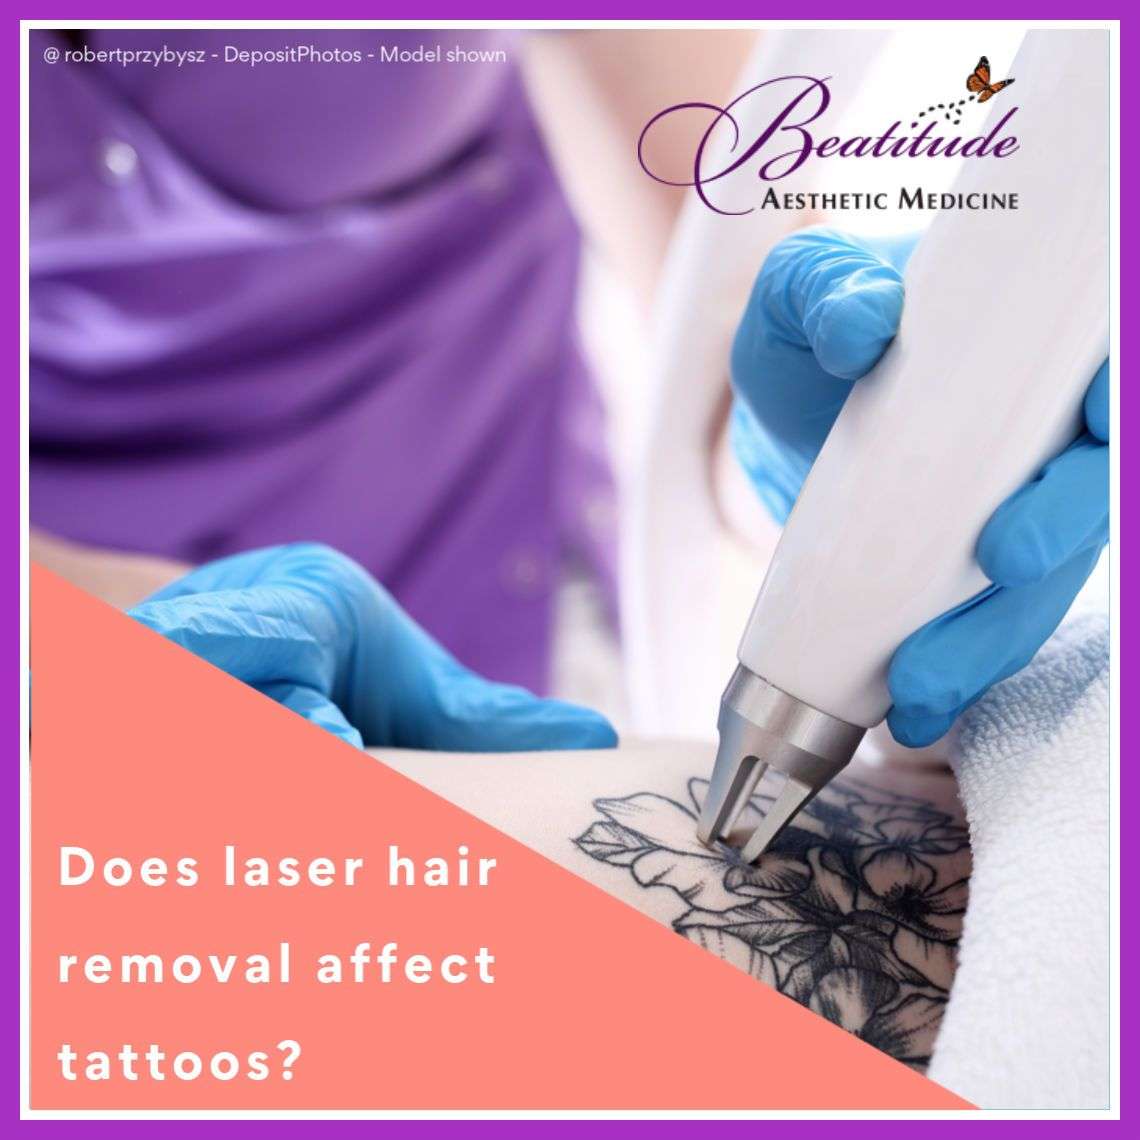 Does laser hair removal affect tattoo removal?